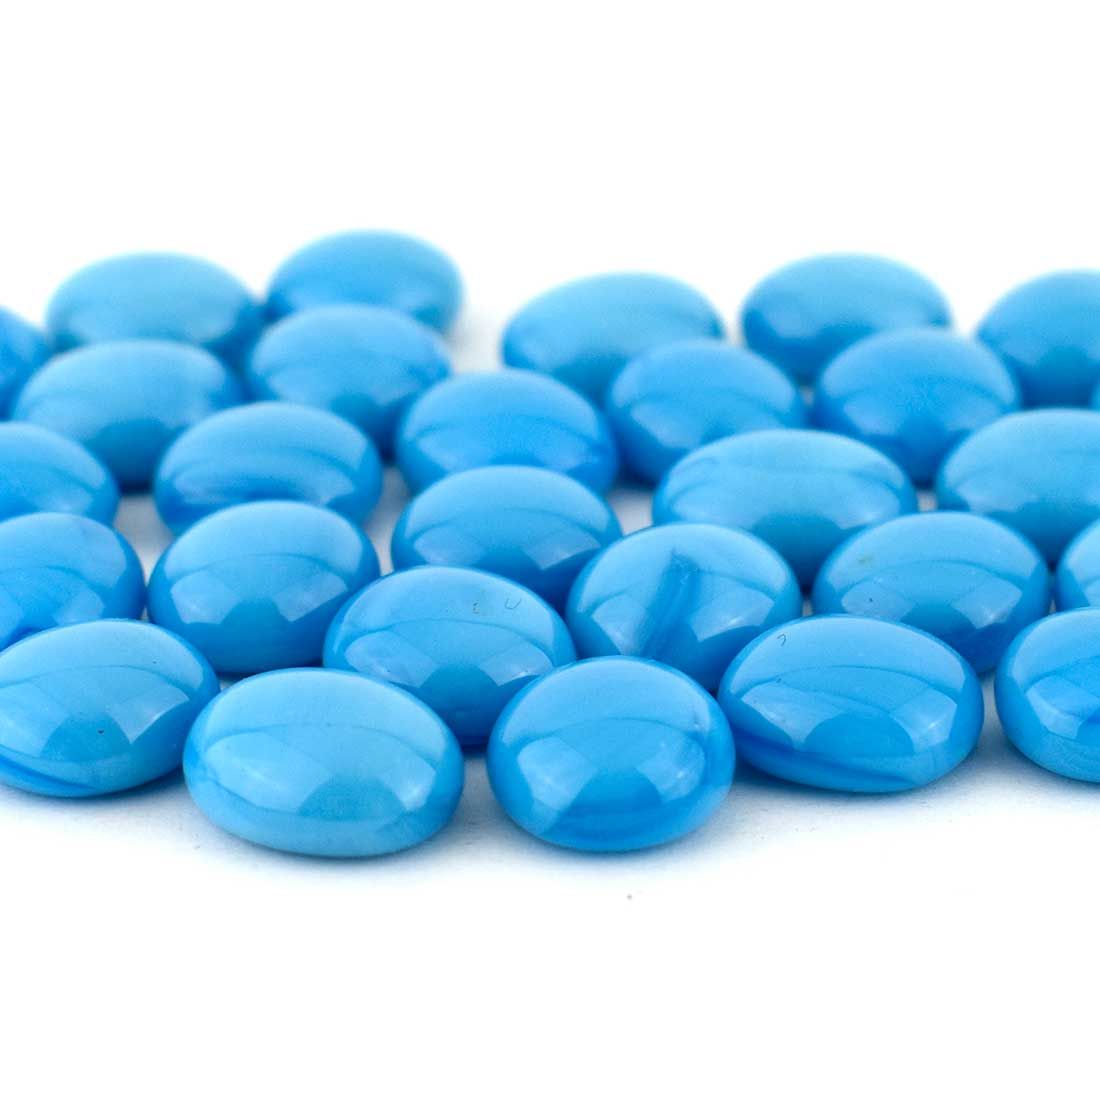 TURQUOISE BLUE OPAL PEBBLES by OCEANSIDE COMPATIBLE & SYS 96 GLASS